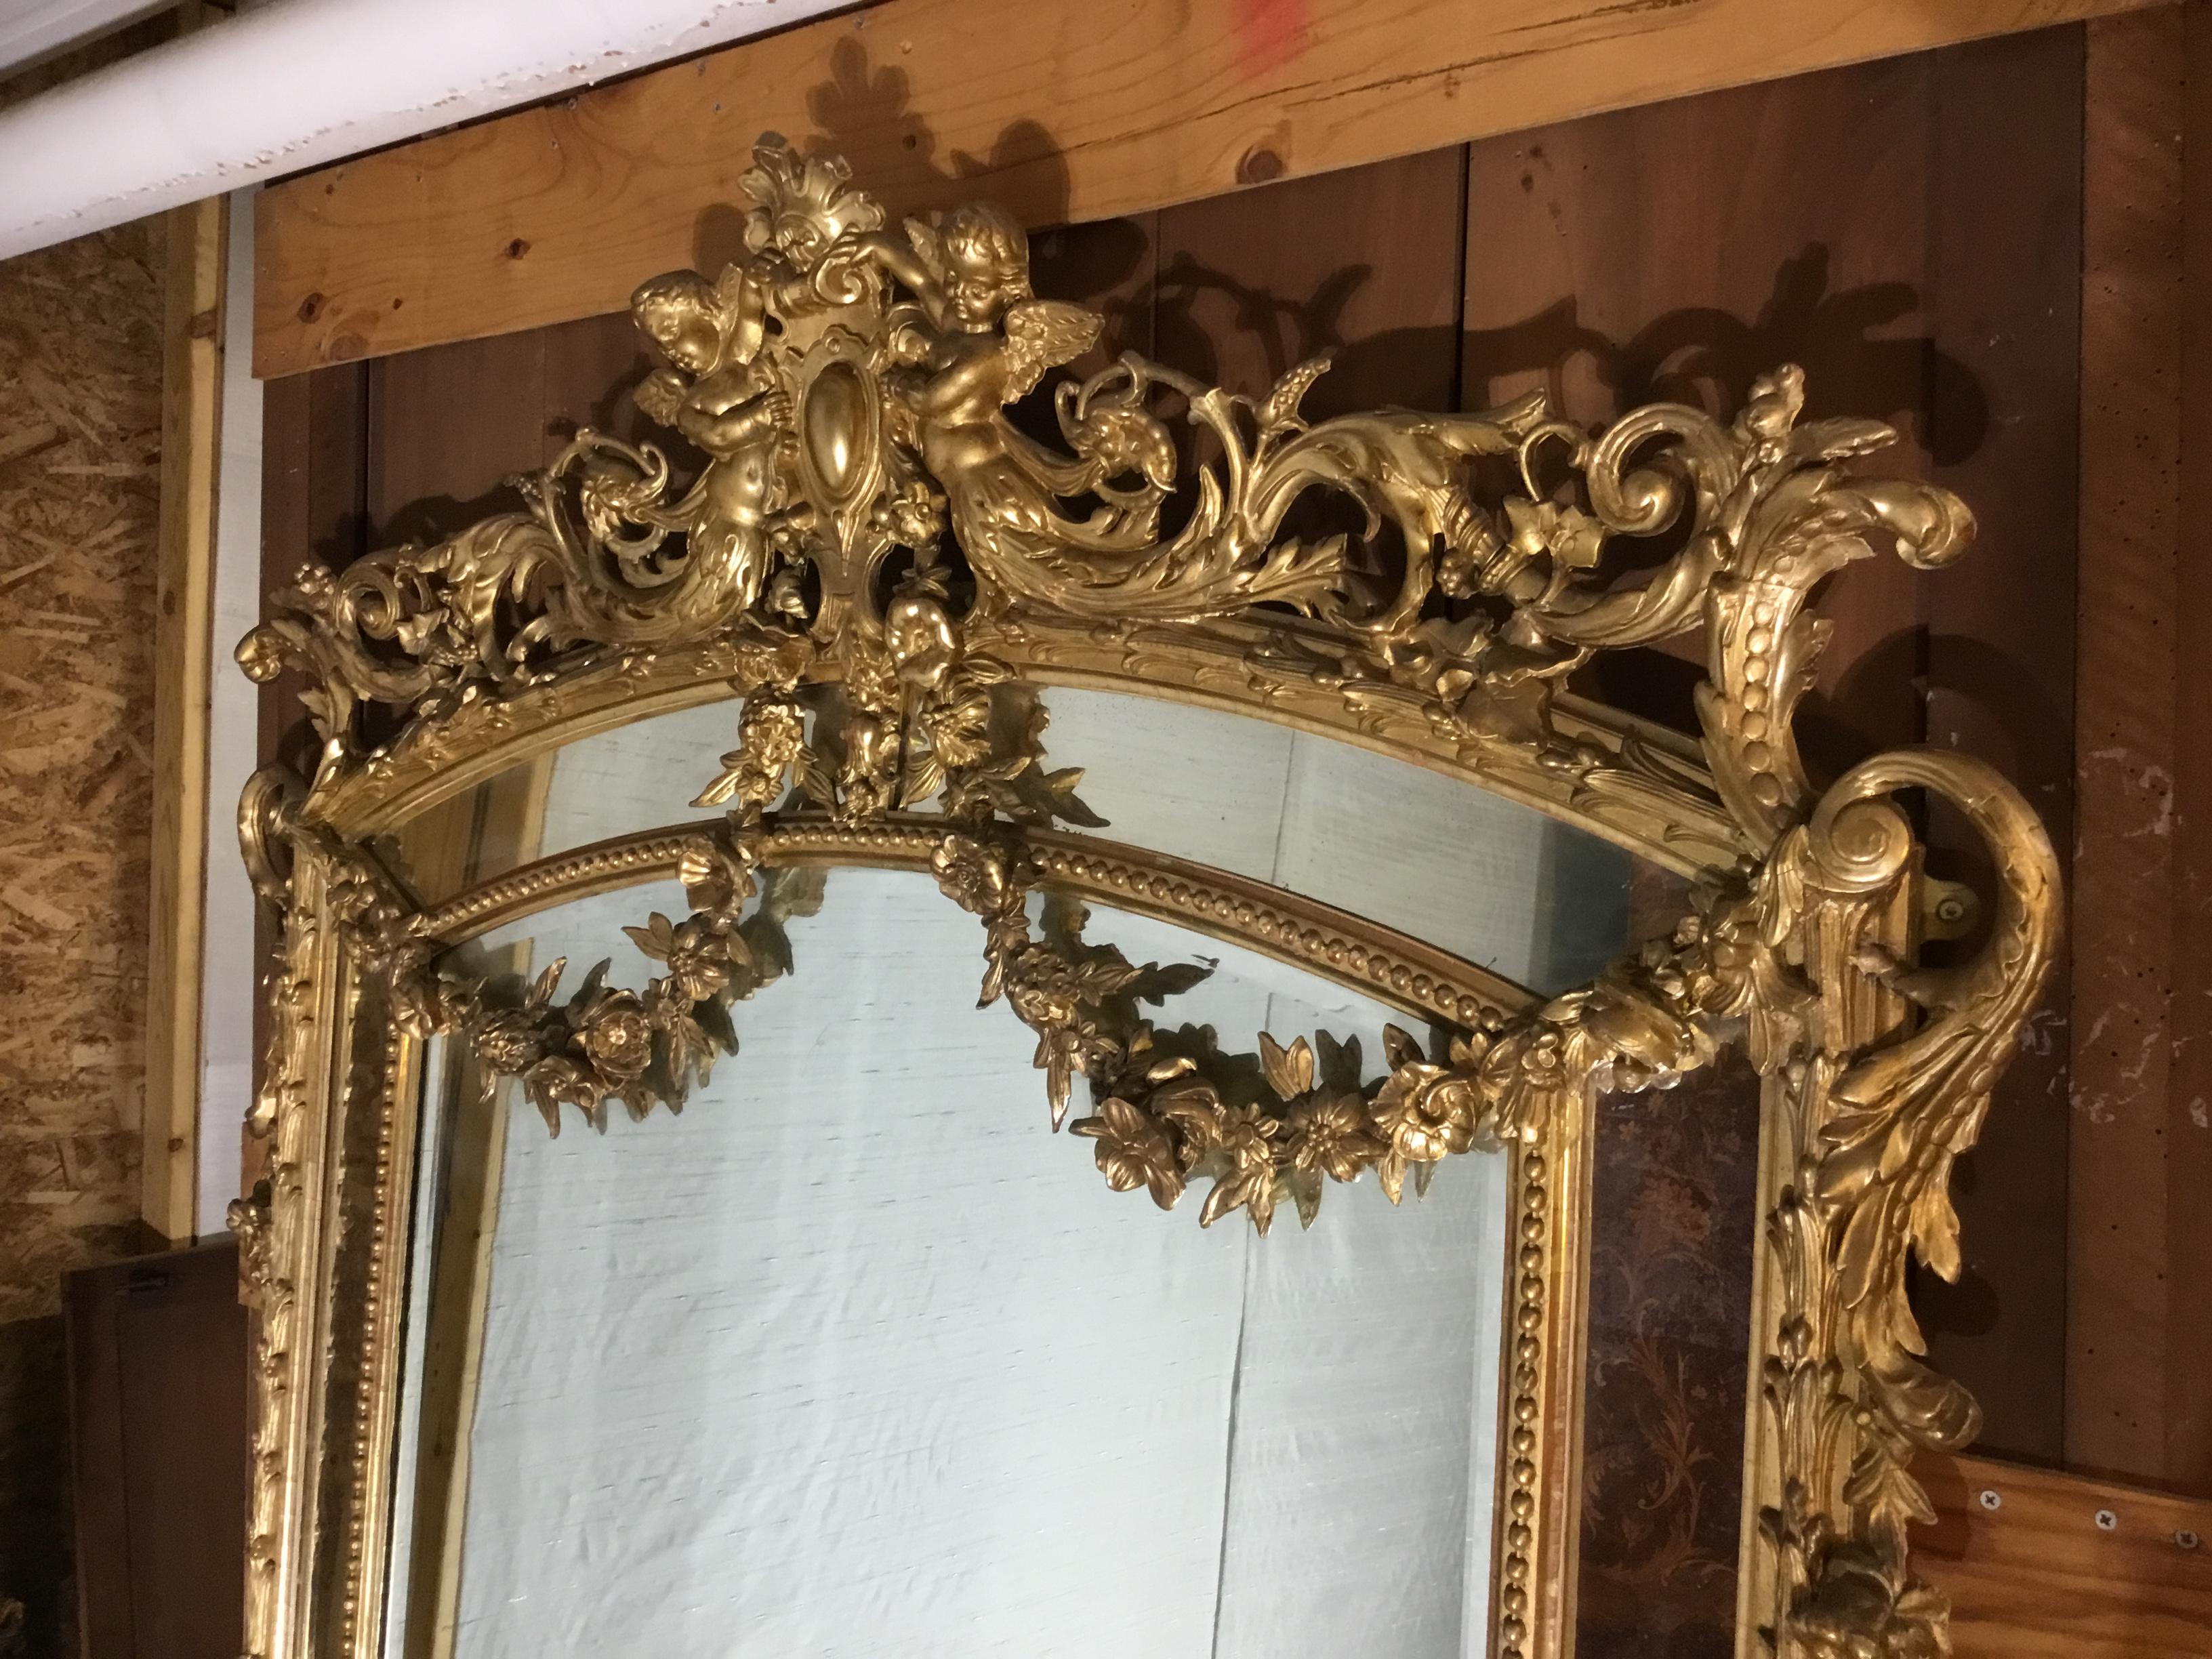 Here is a beautiful antique 19th century French gilt parecloses mirror. The shape of the mirror frame and the decorations used are typical for the Louis XVI. The mirror frame has a central glass plate with a facetted edge and is surrounded by four